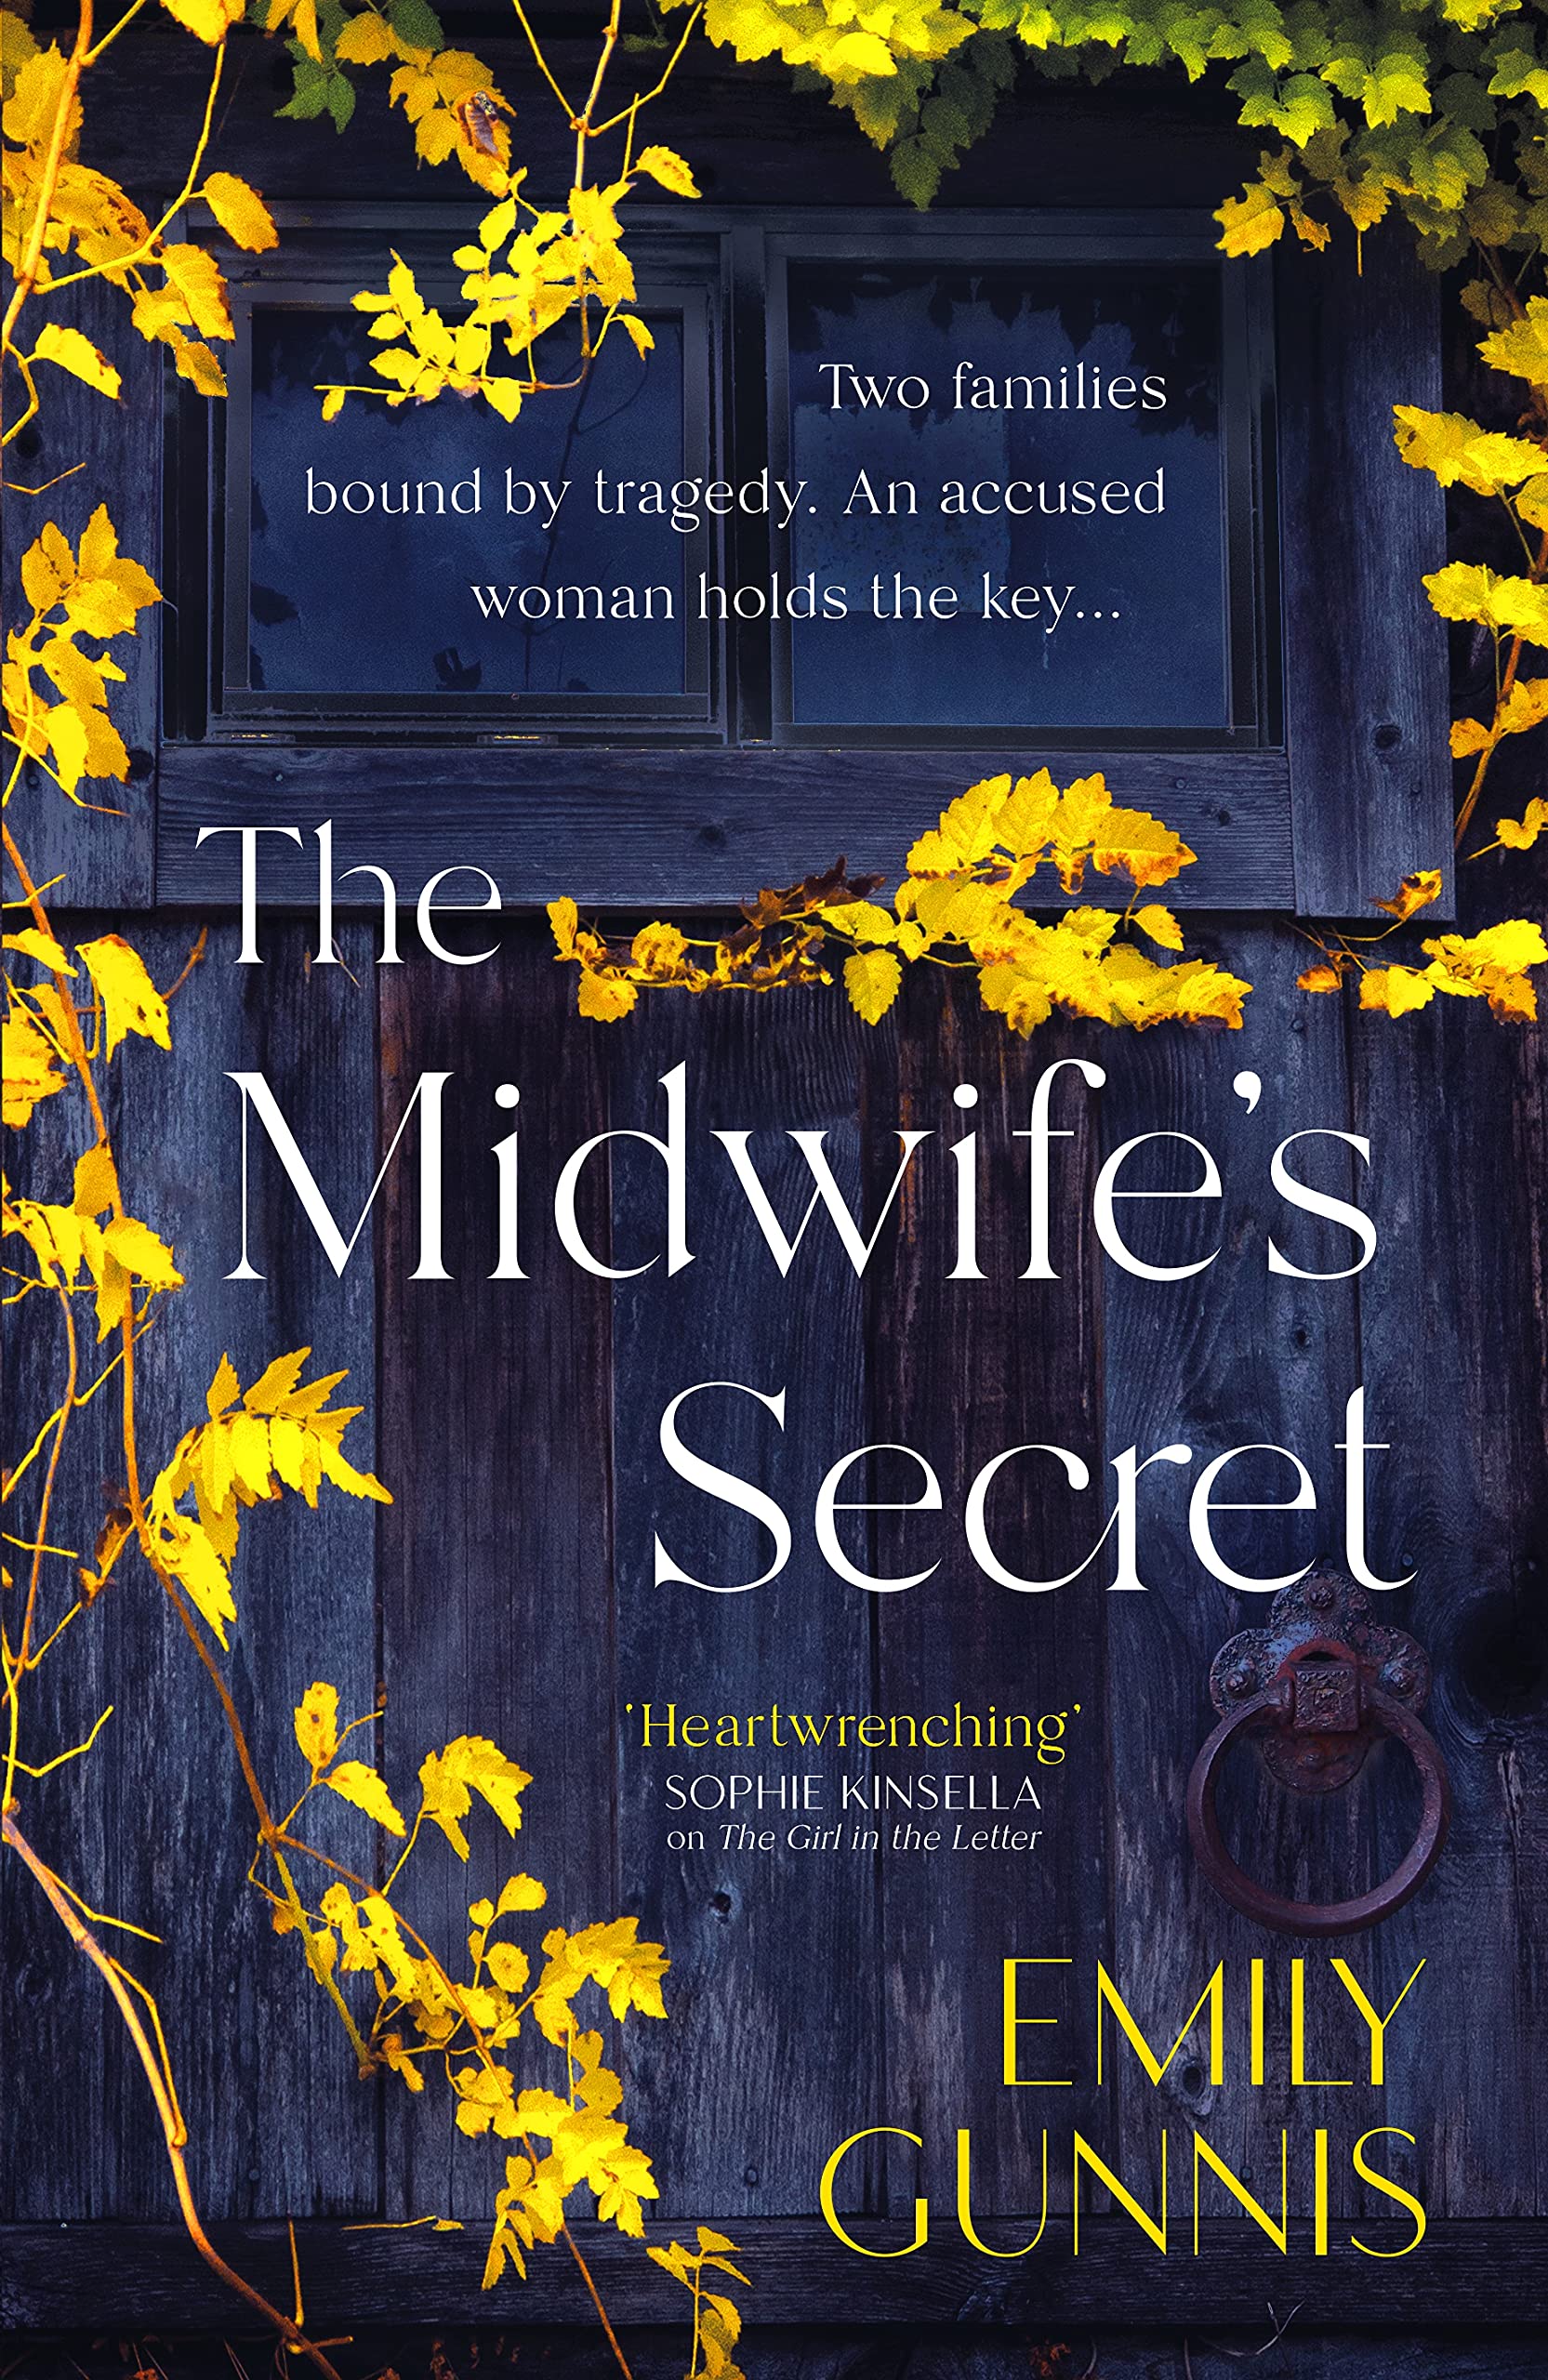 The Midwife's Secret by Emily Gunnis